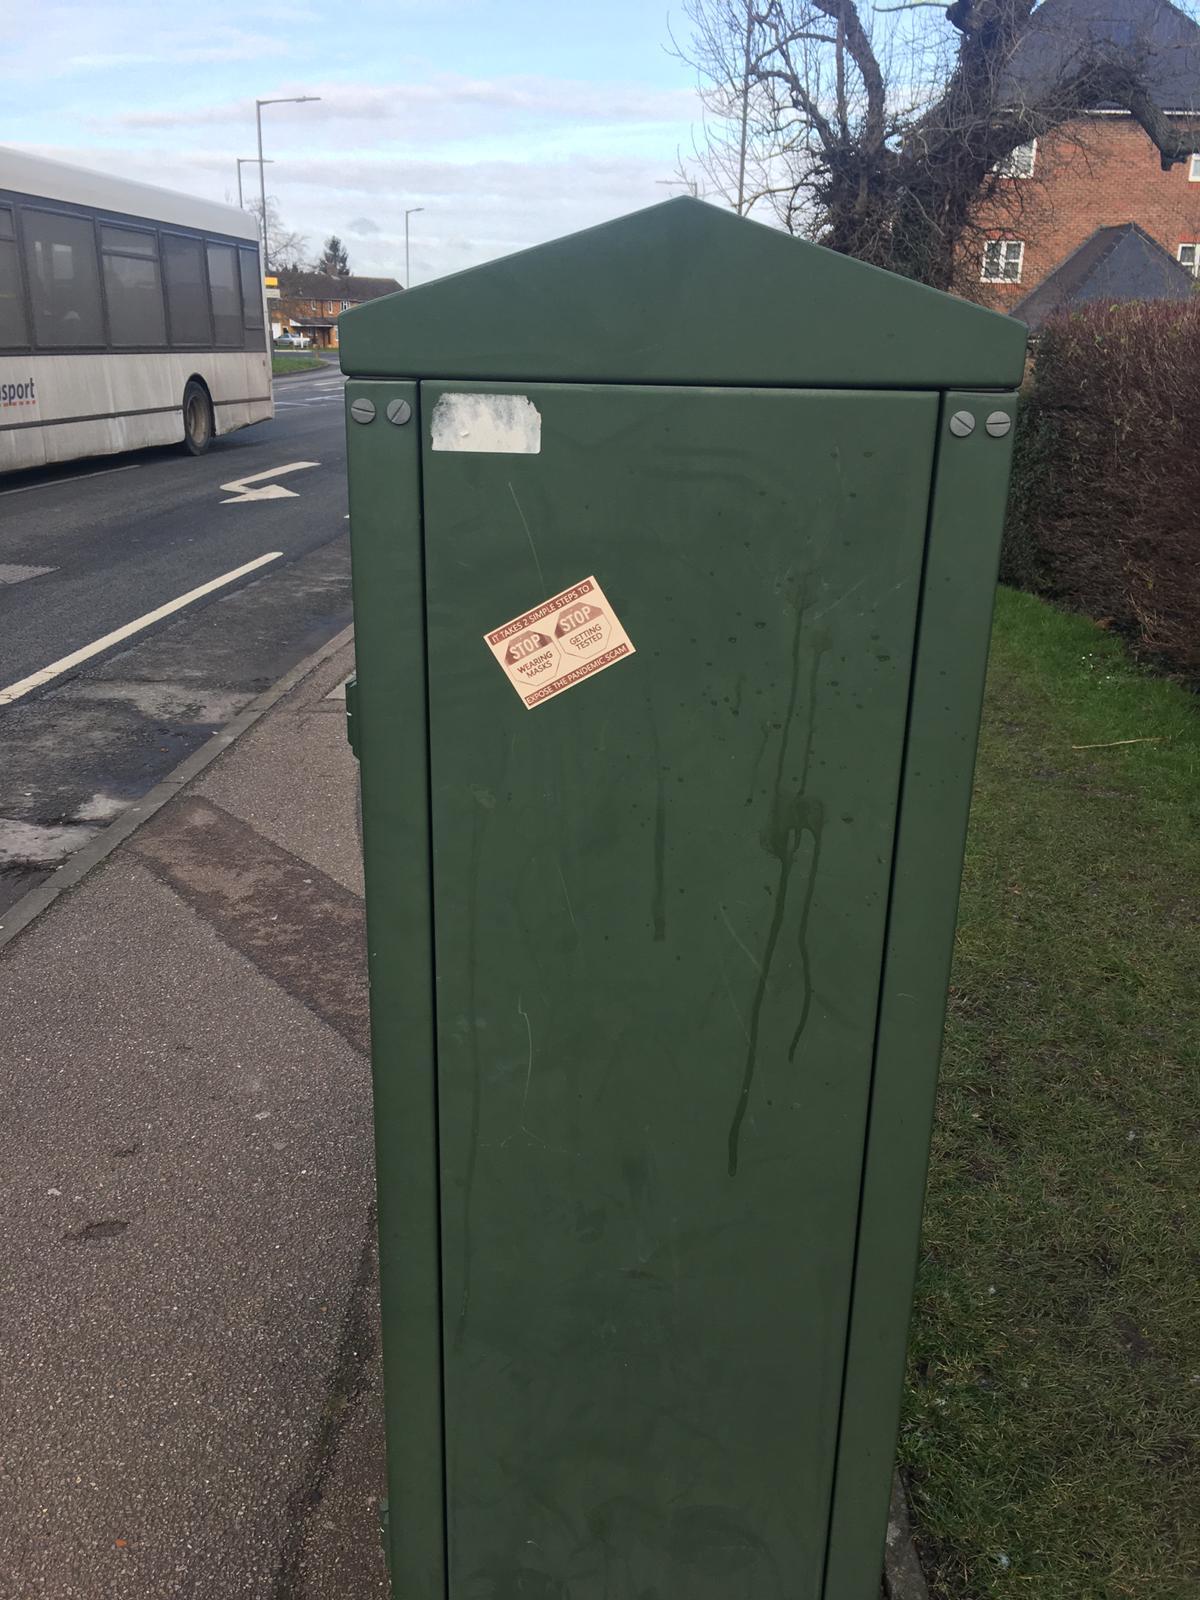 The sticker is a few yards away from the entrance of Stoke Mandeville Hospital 